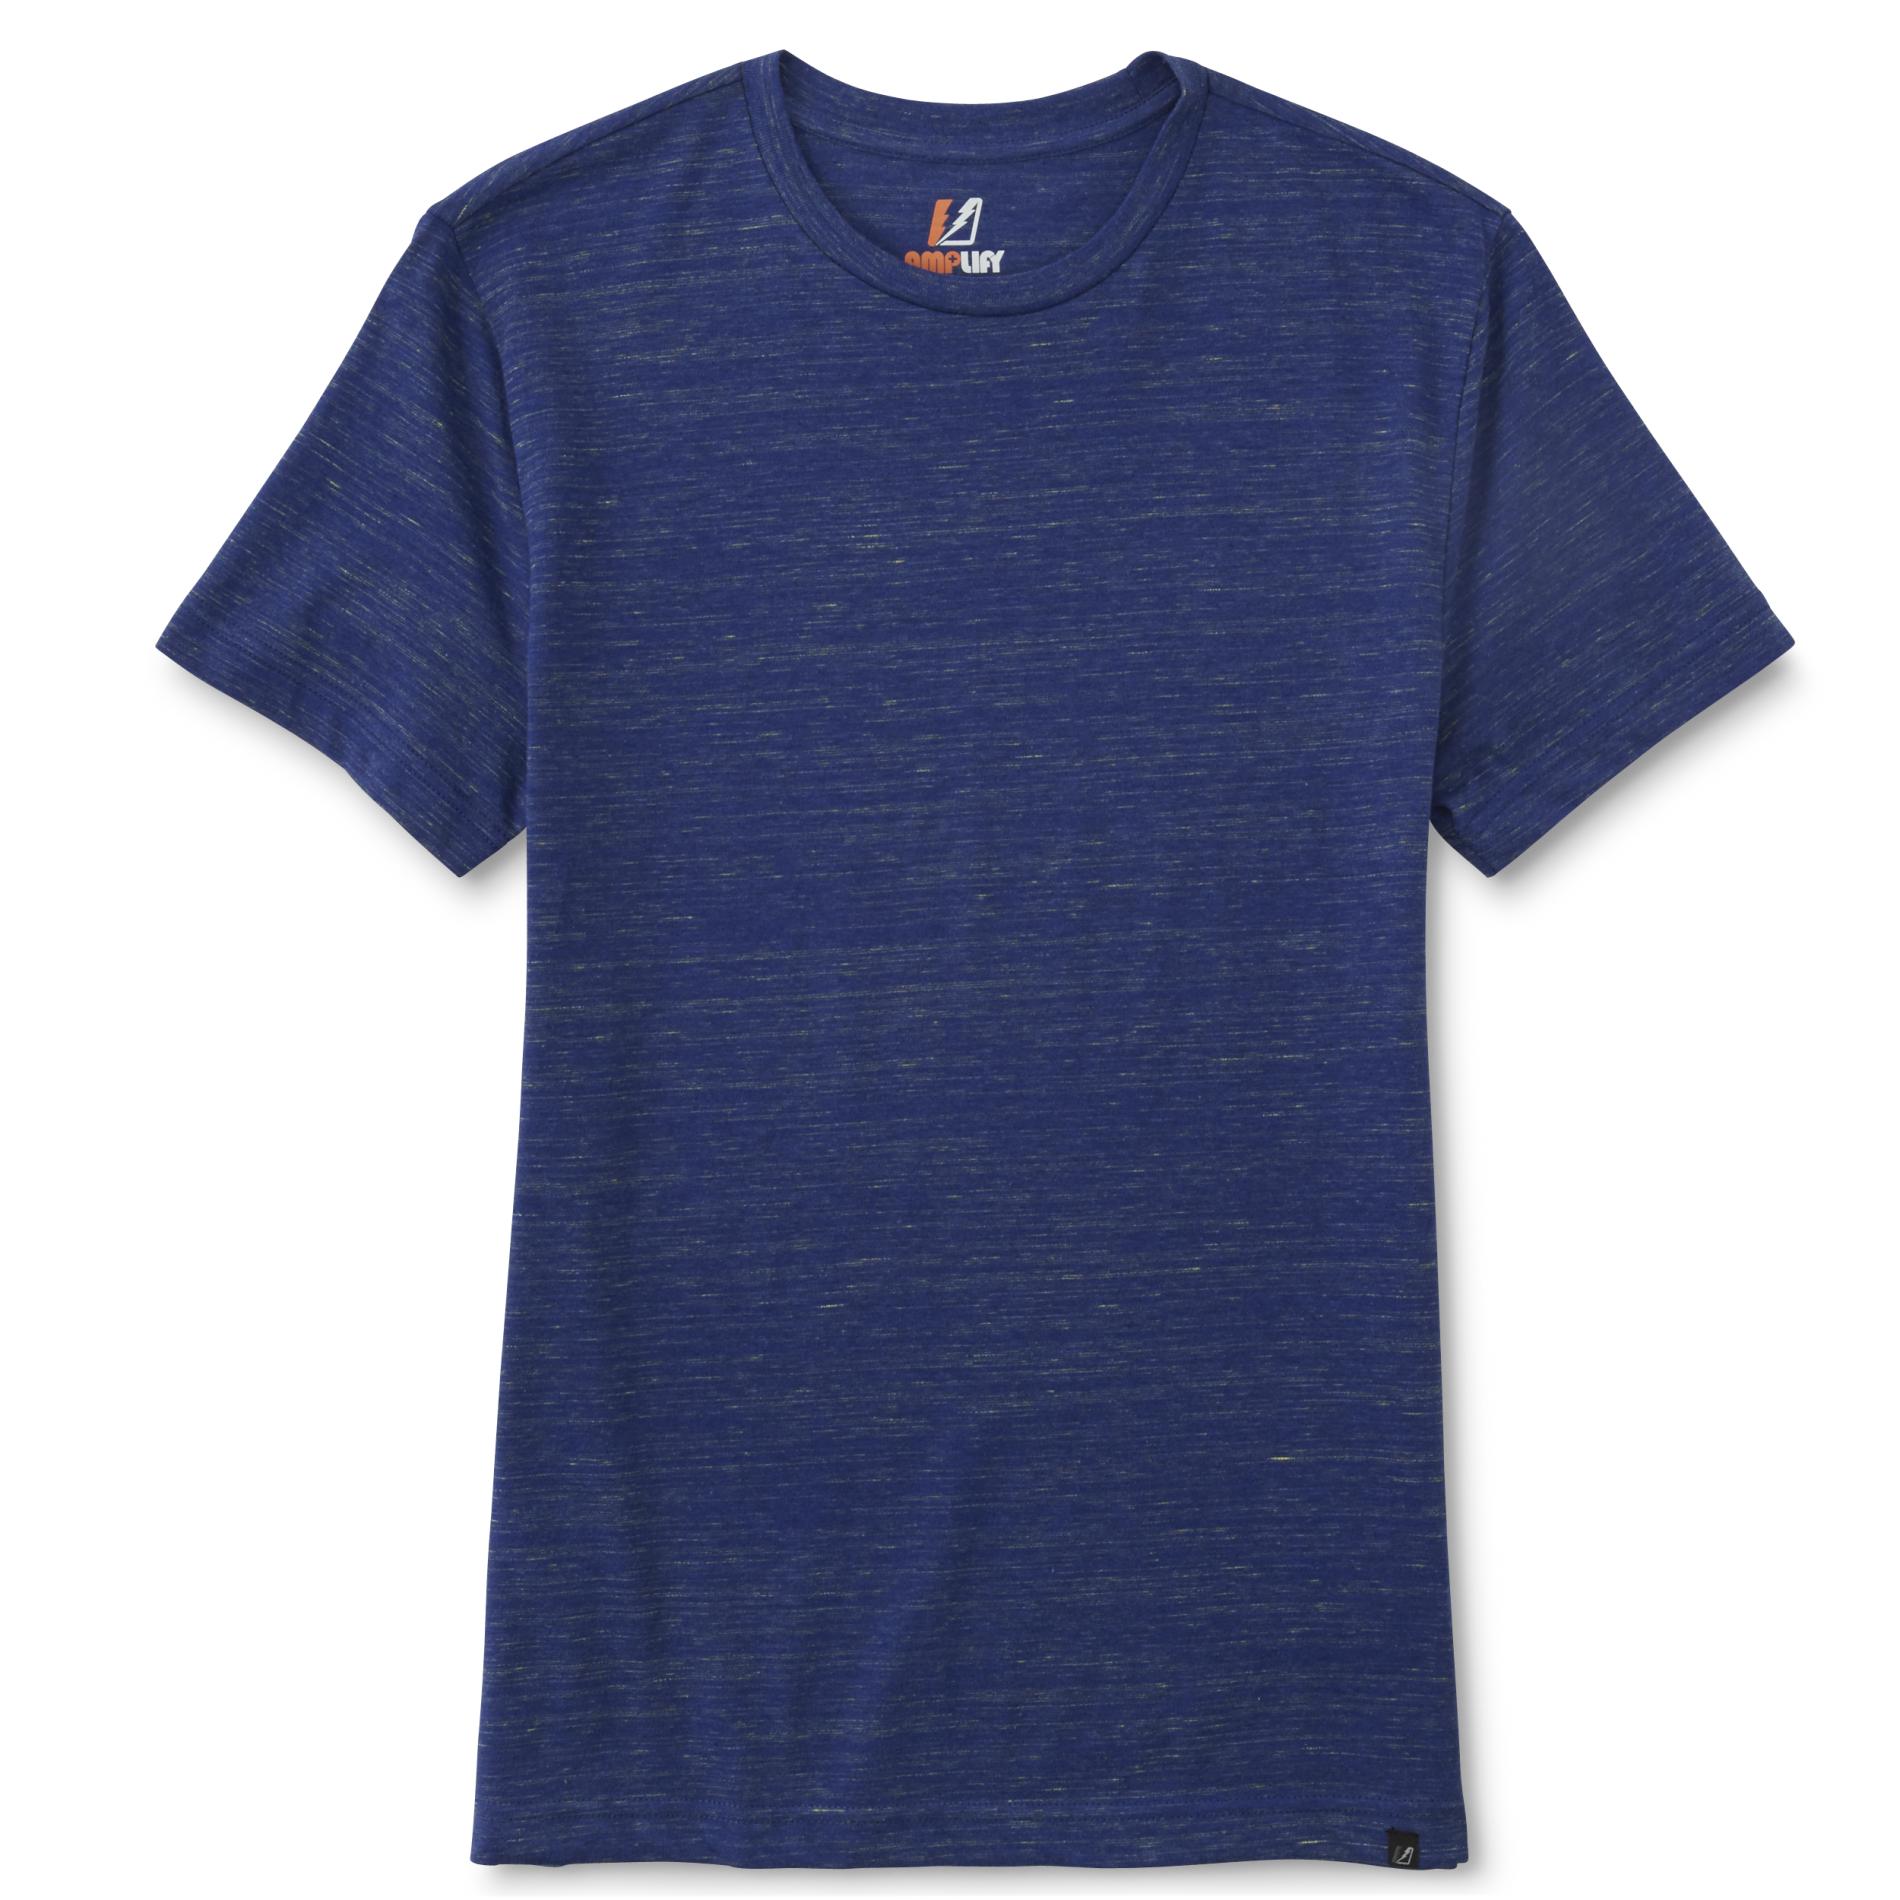 Amplify Young Men's Crew Neck T-Shirt - Space-Dyed